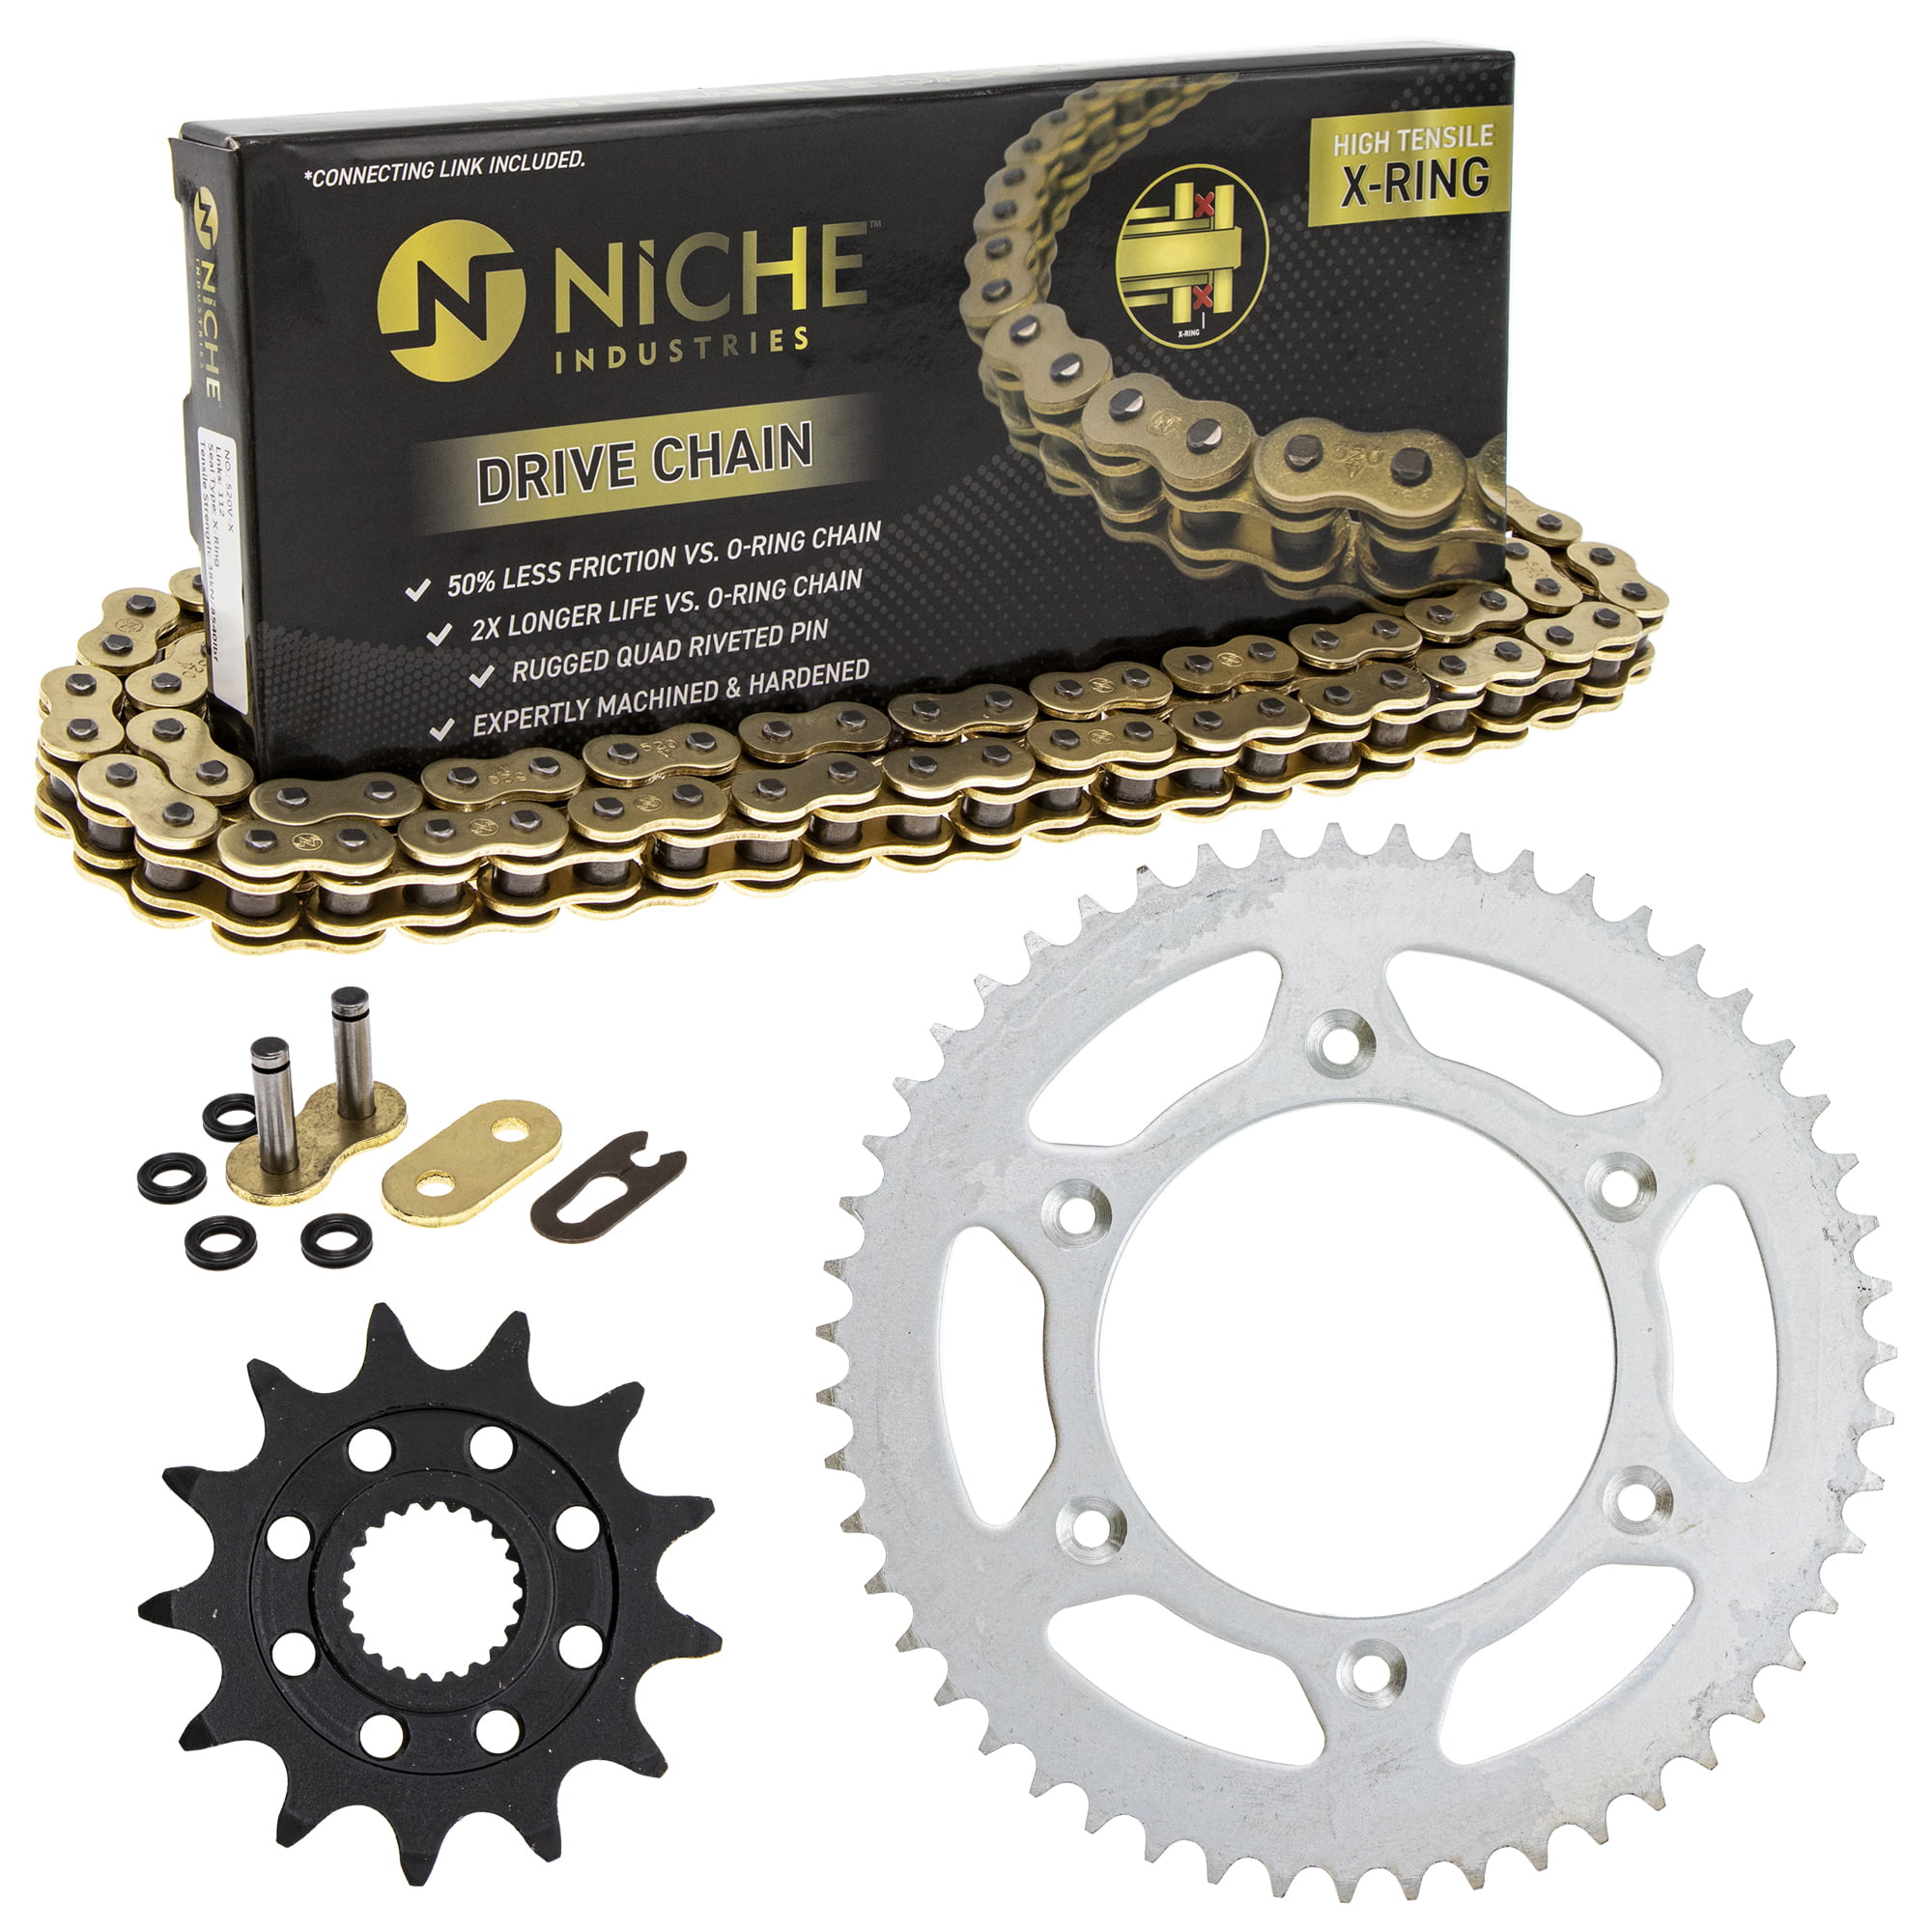 NICHE Drive Sprocket Chain Combo for Honda CRF250R Front 13 Rear 51 Tooth 520NZ Standard 114 Links 